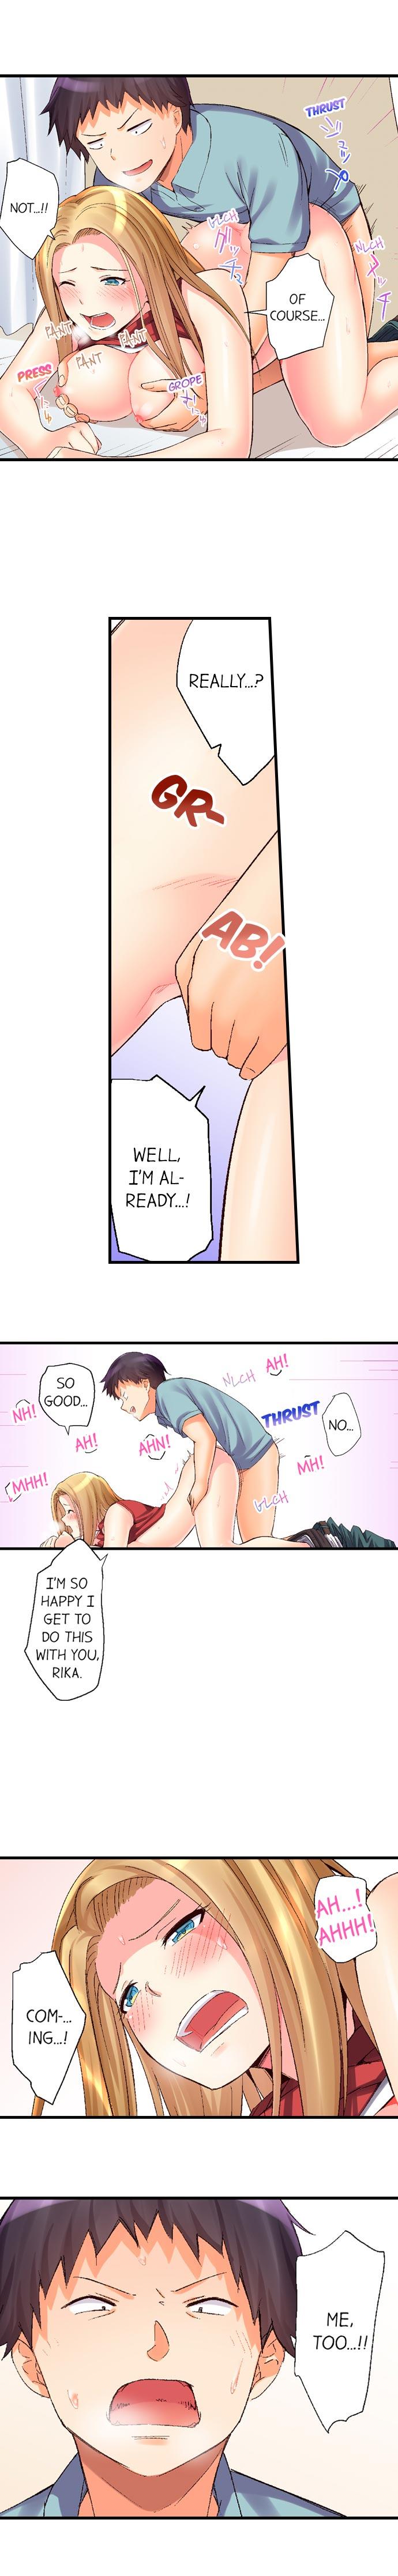 No Panty Booty Workout! Ch. 1 - 15 133